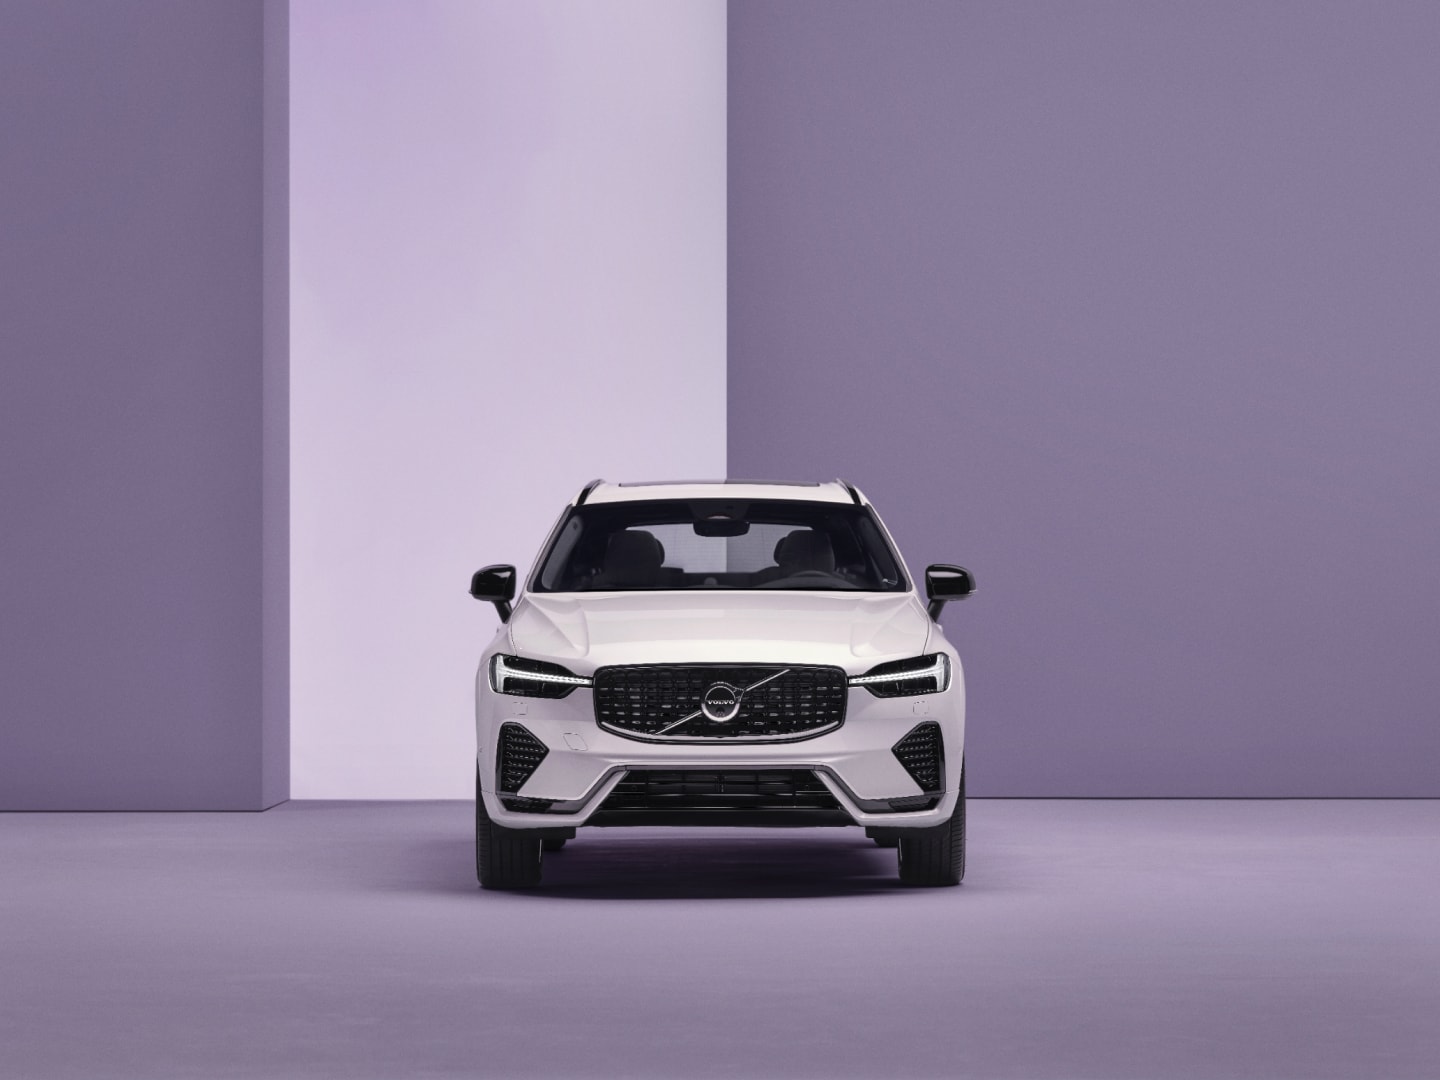 The front view of a Volvo XC60 plug-in hybrid.